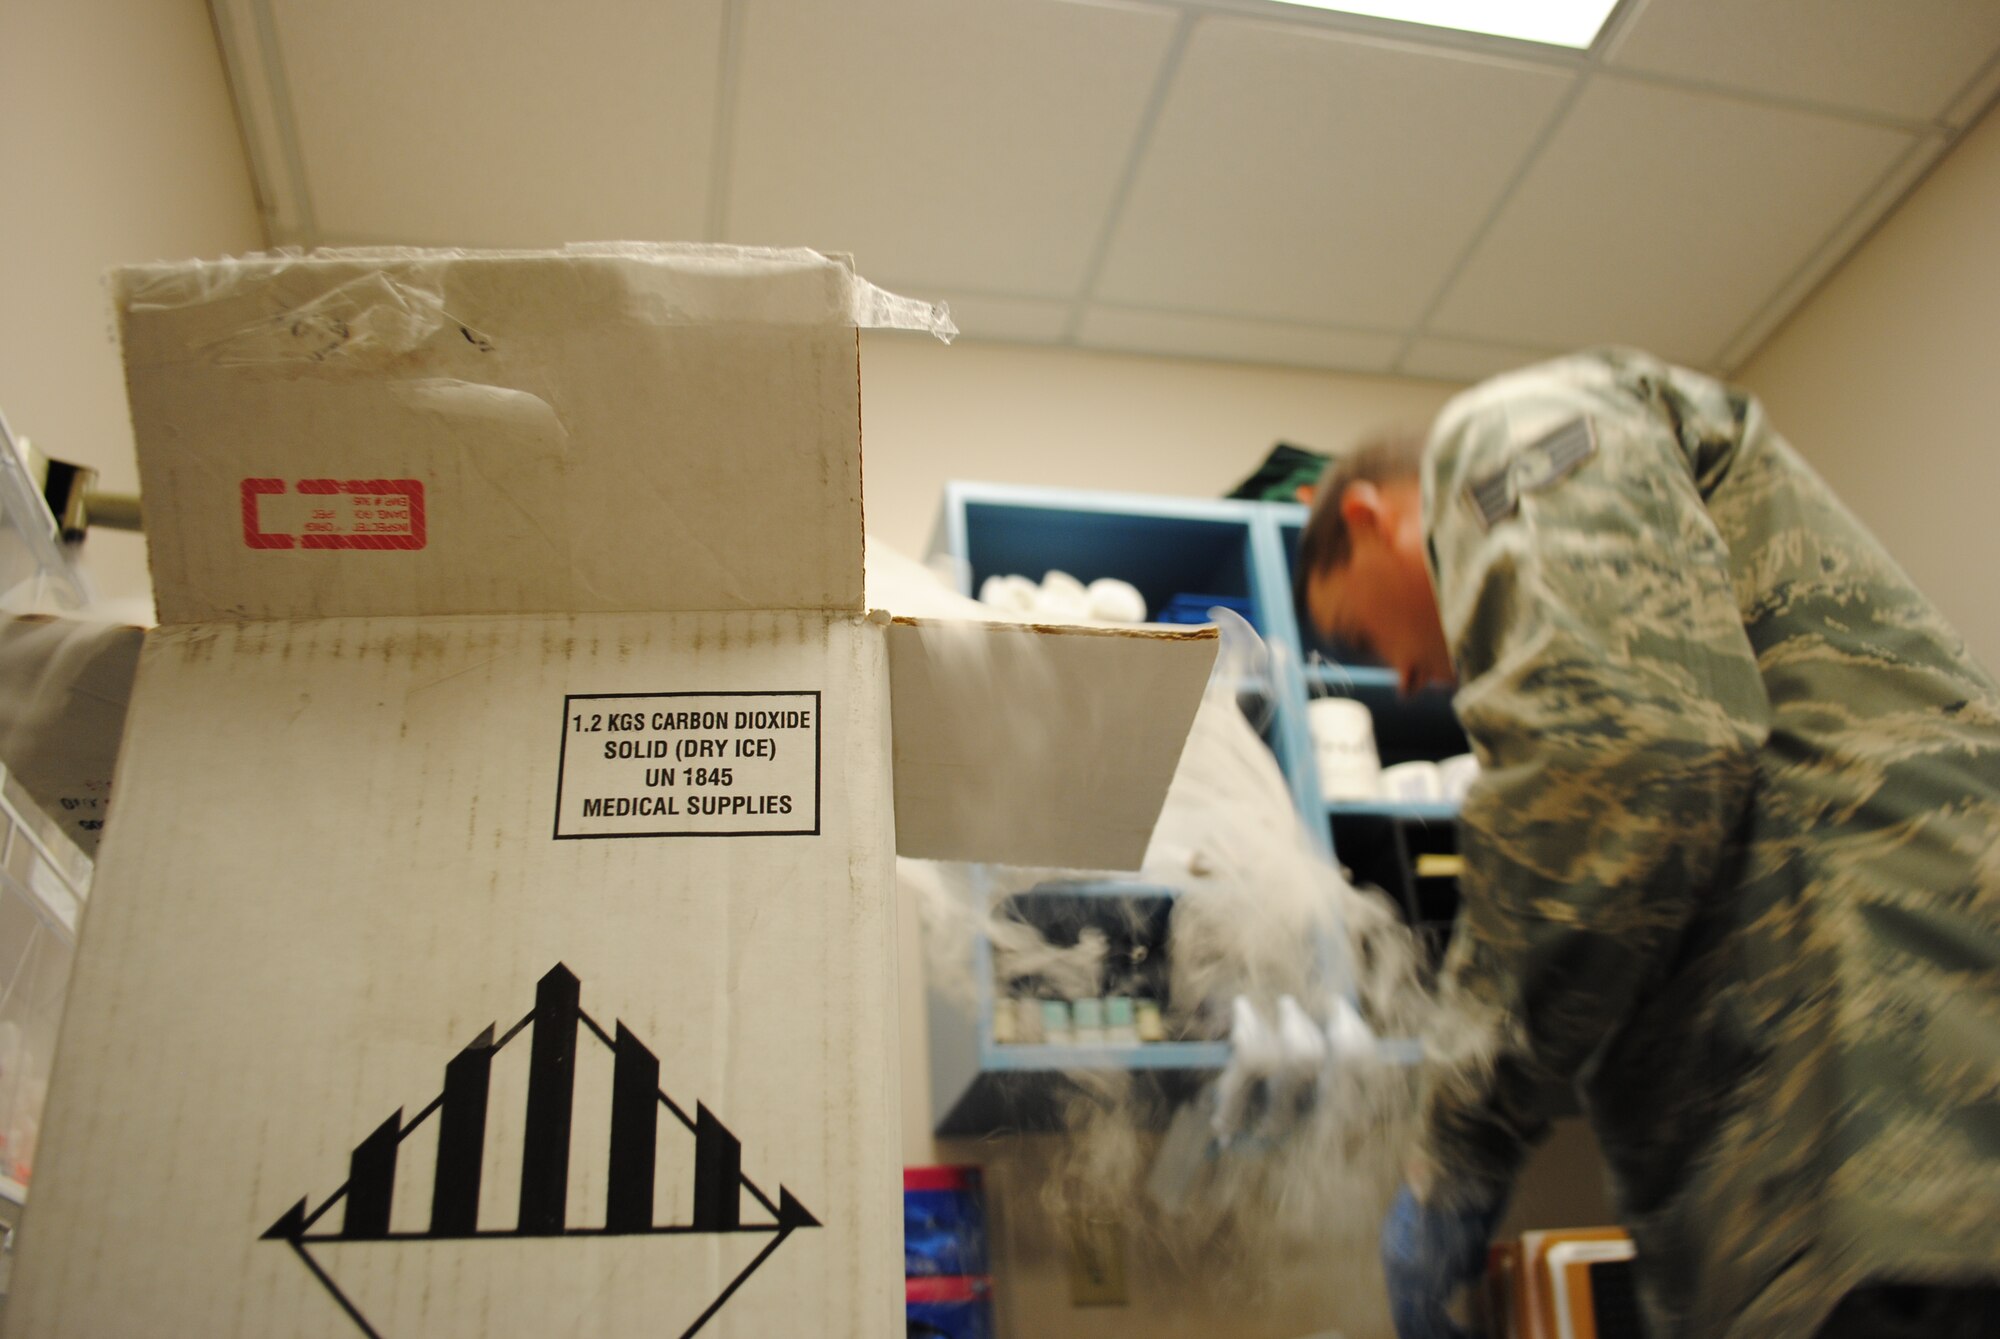 Staff Sgt. Thomas C. Sullivan Jr., 319th Medical Support Squadron laboratory technician, prepares medical samples for shipment in a box containing dry ice May 22, 2013, at the medical laboratory on Grand Forks Air Force Base, N.D. Dry ice is frequently used to preserve medical samples that must remain frozen or cold during shipment. (U.S. Air Force photo/Staff Sgt. Luis Loza Gutierrez)
